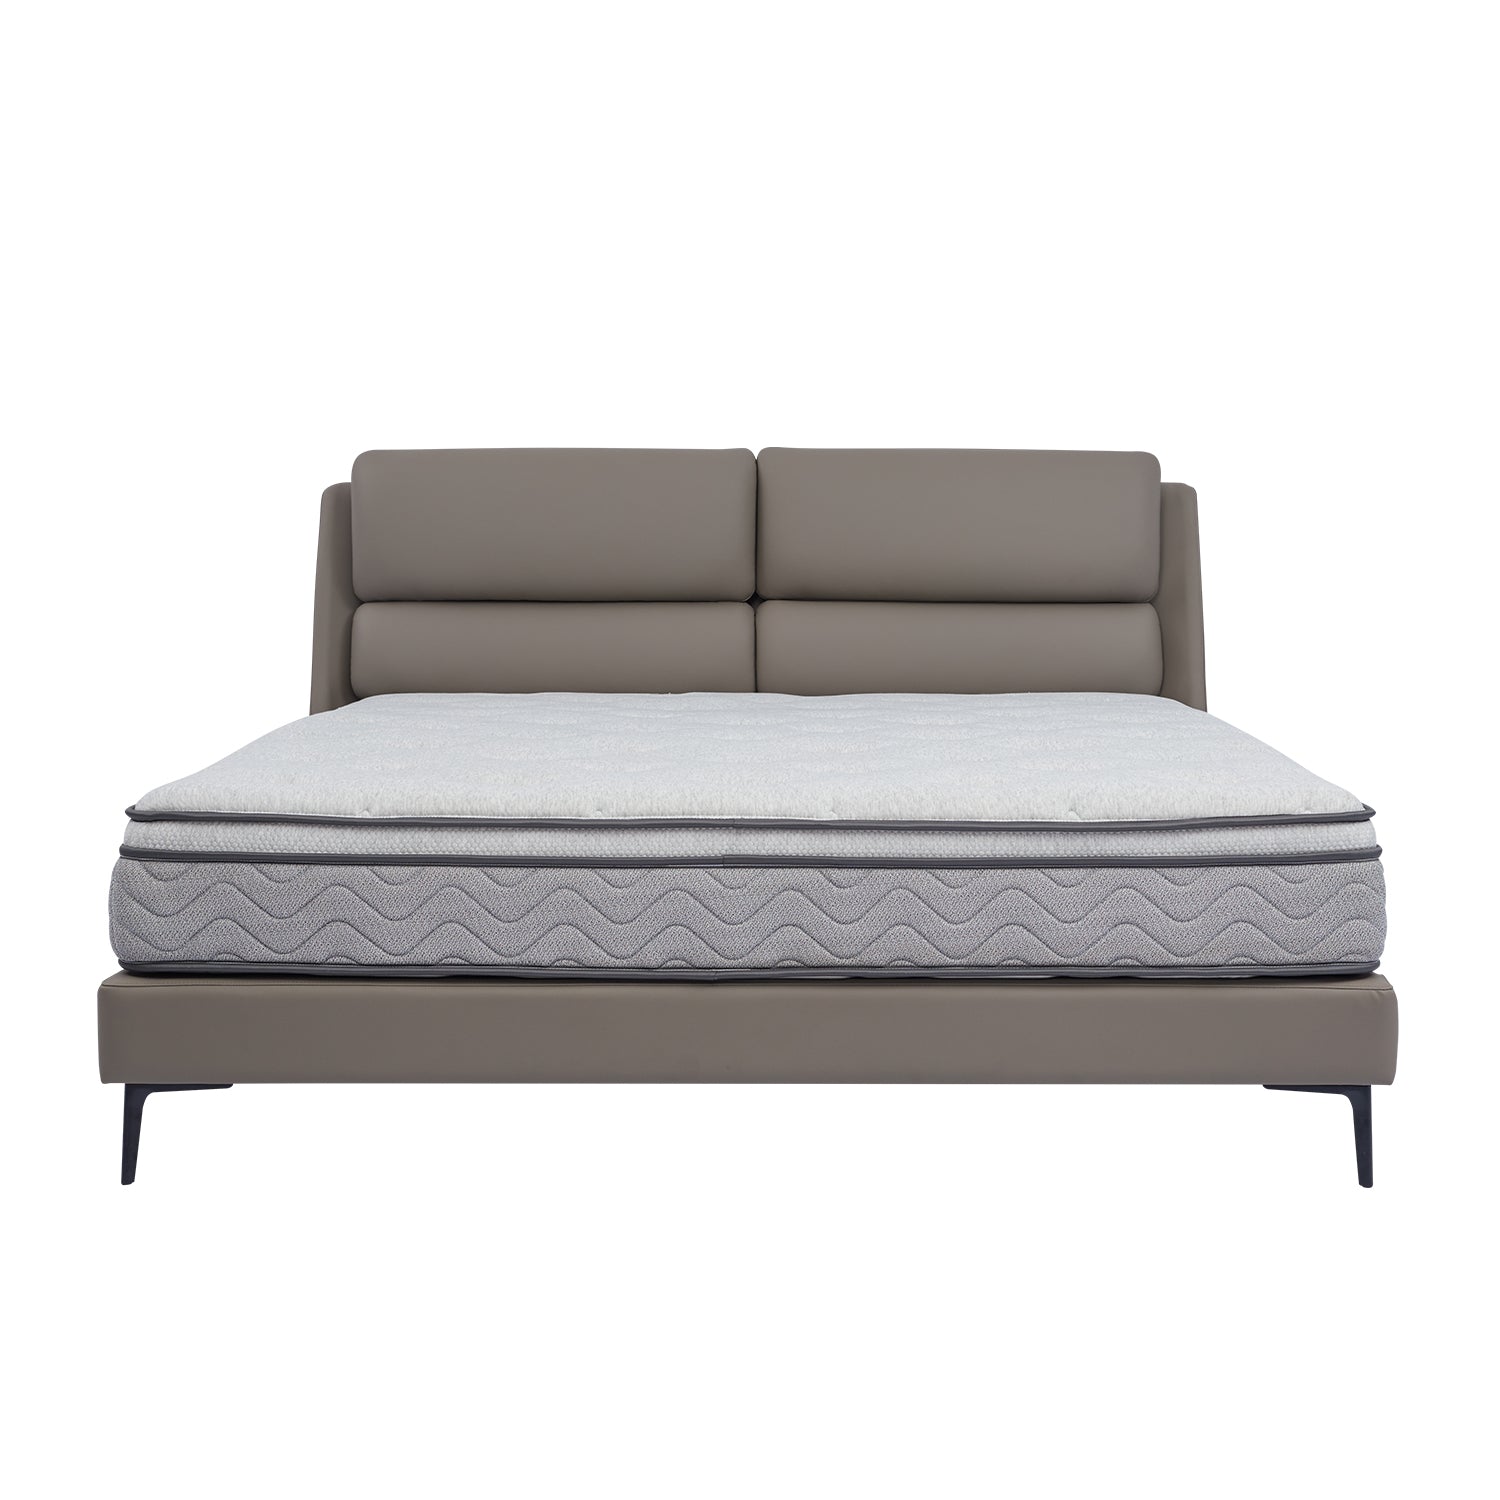 DeRUCCI Bed Frame BOC1 - 019 with a taupe leather padded headboard and grey mattress, featuring a modern and sleek design with slim black legs.